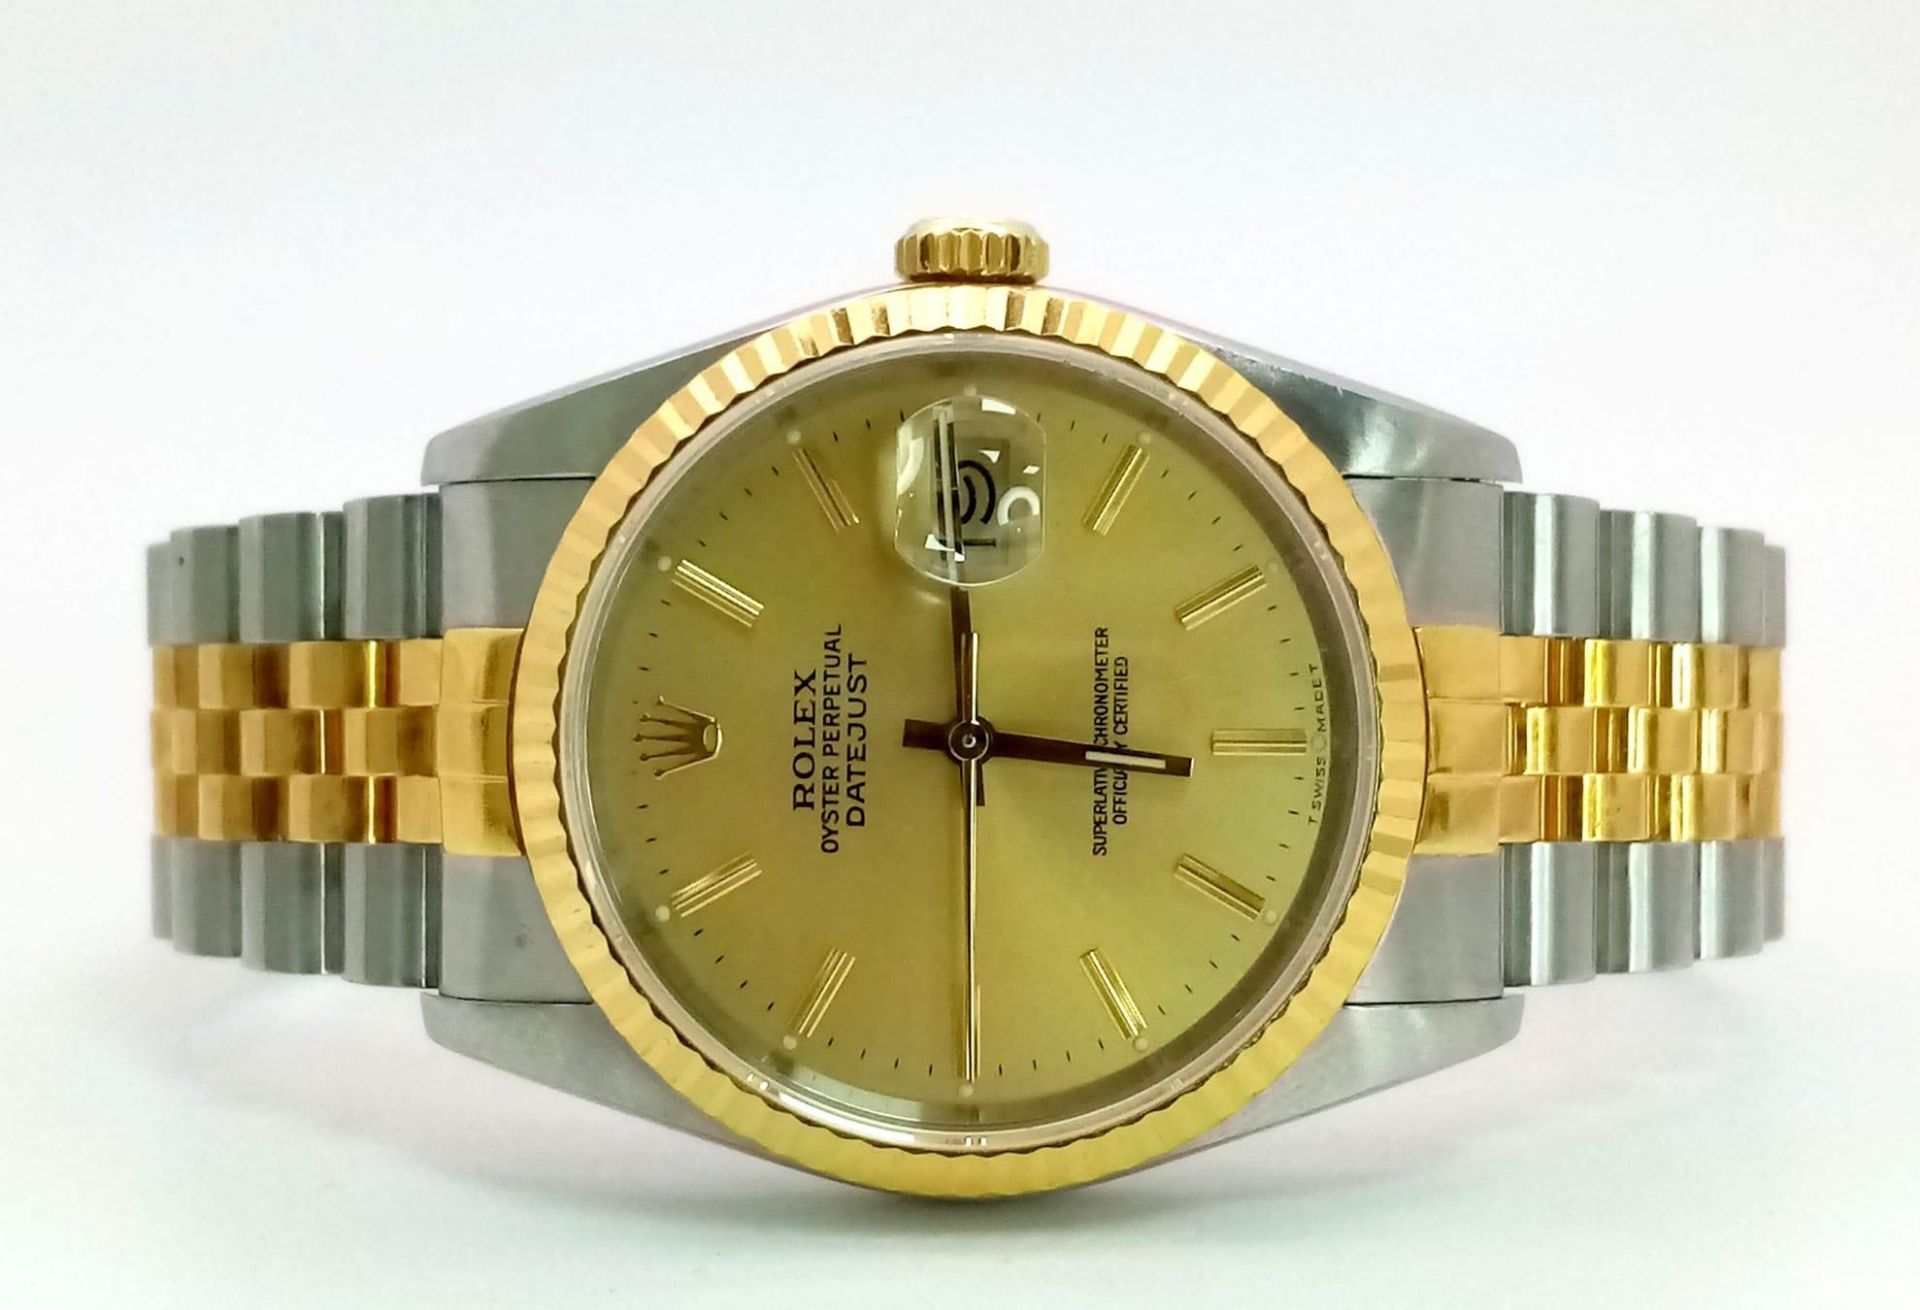 THE CLASSIC ROLEX OYSTER PERPETUAL DATEJUST IN BI-METAL WITH GOLDTONE DIAL . 36mm - Image 3 of 7